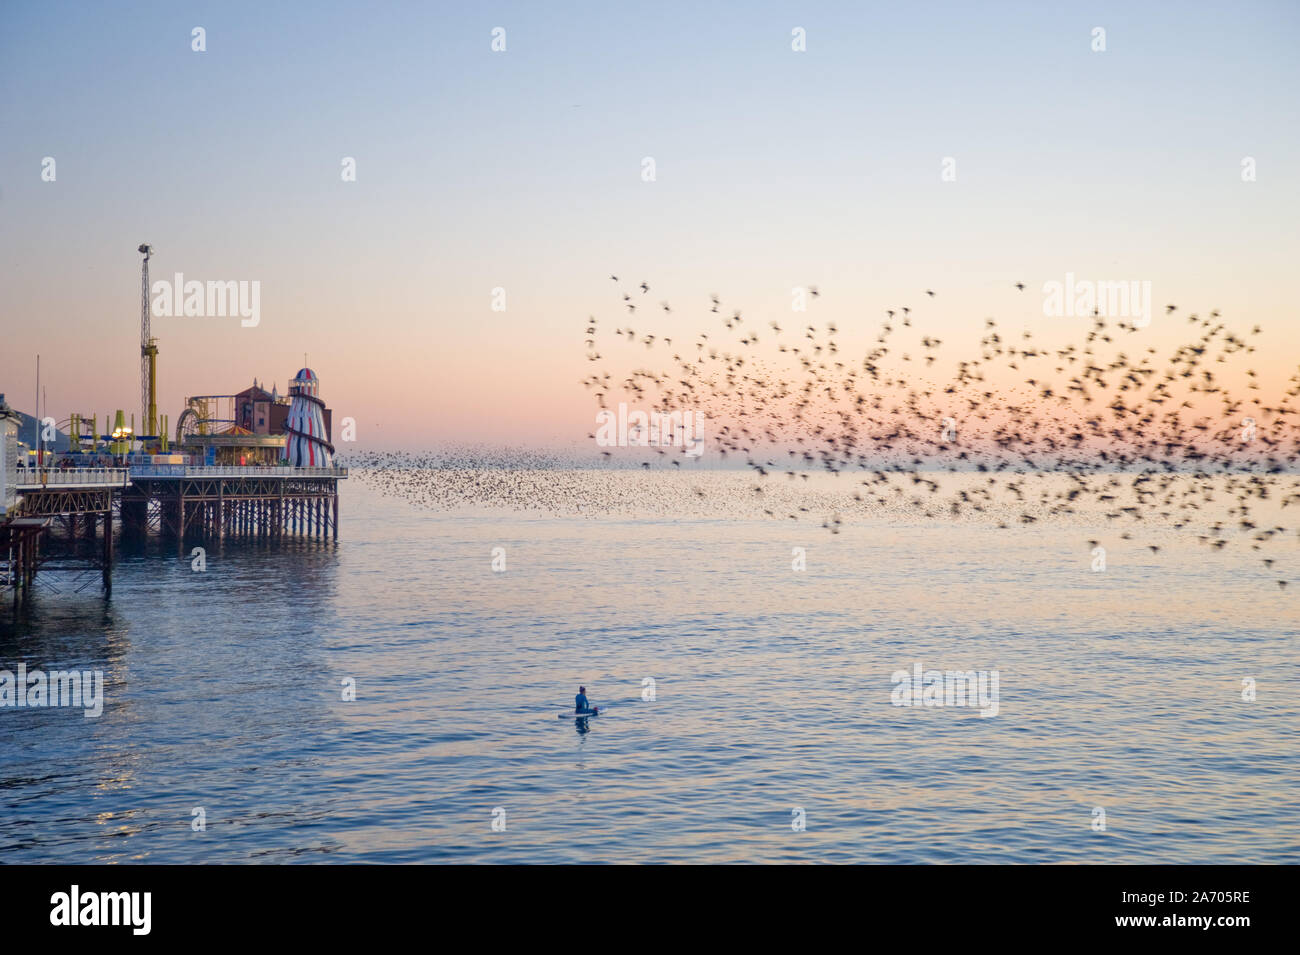 A stand up paddle boarder watches as a starling murmuration takes place near Brighton's Palace Pier. Stock Photo